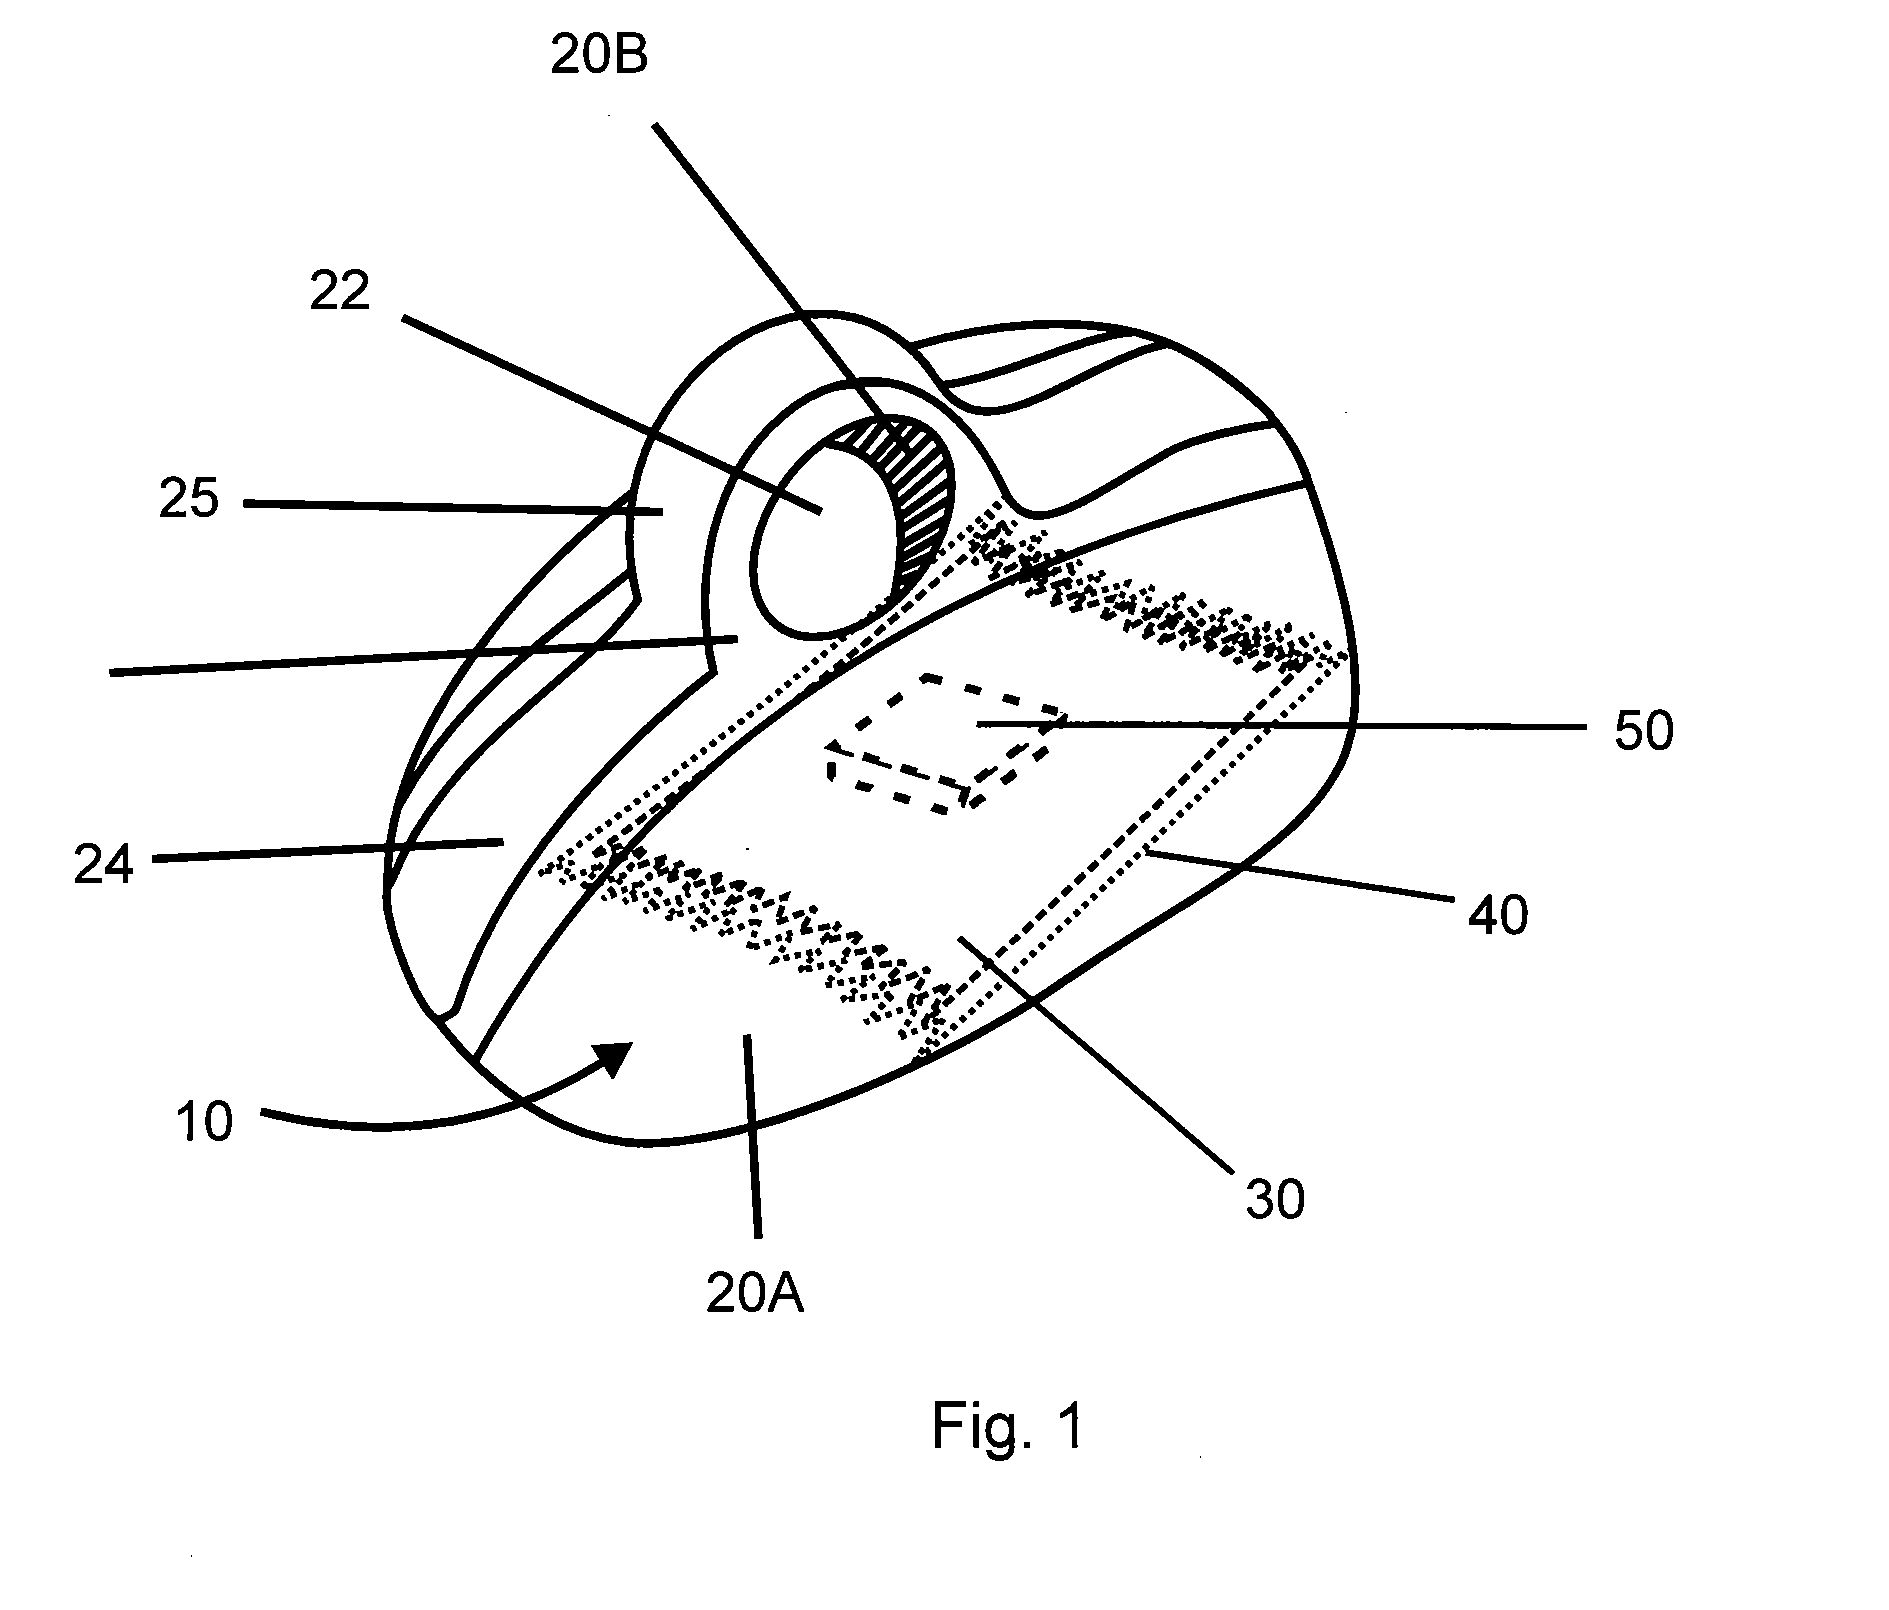 Hair cutting apparatus and method of use